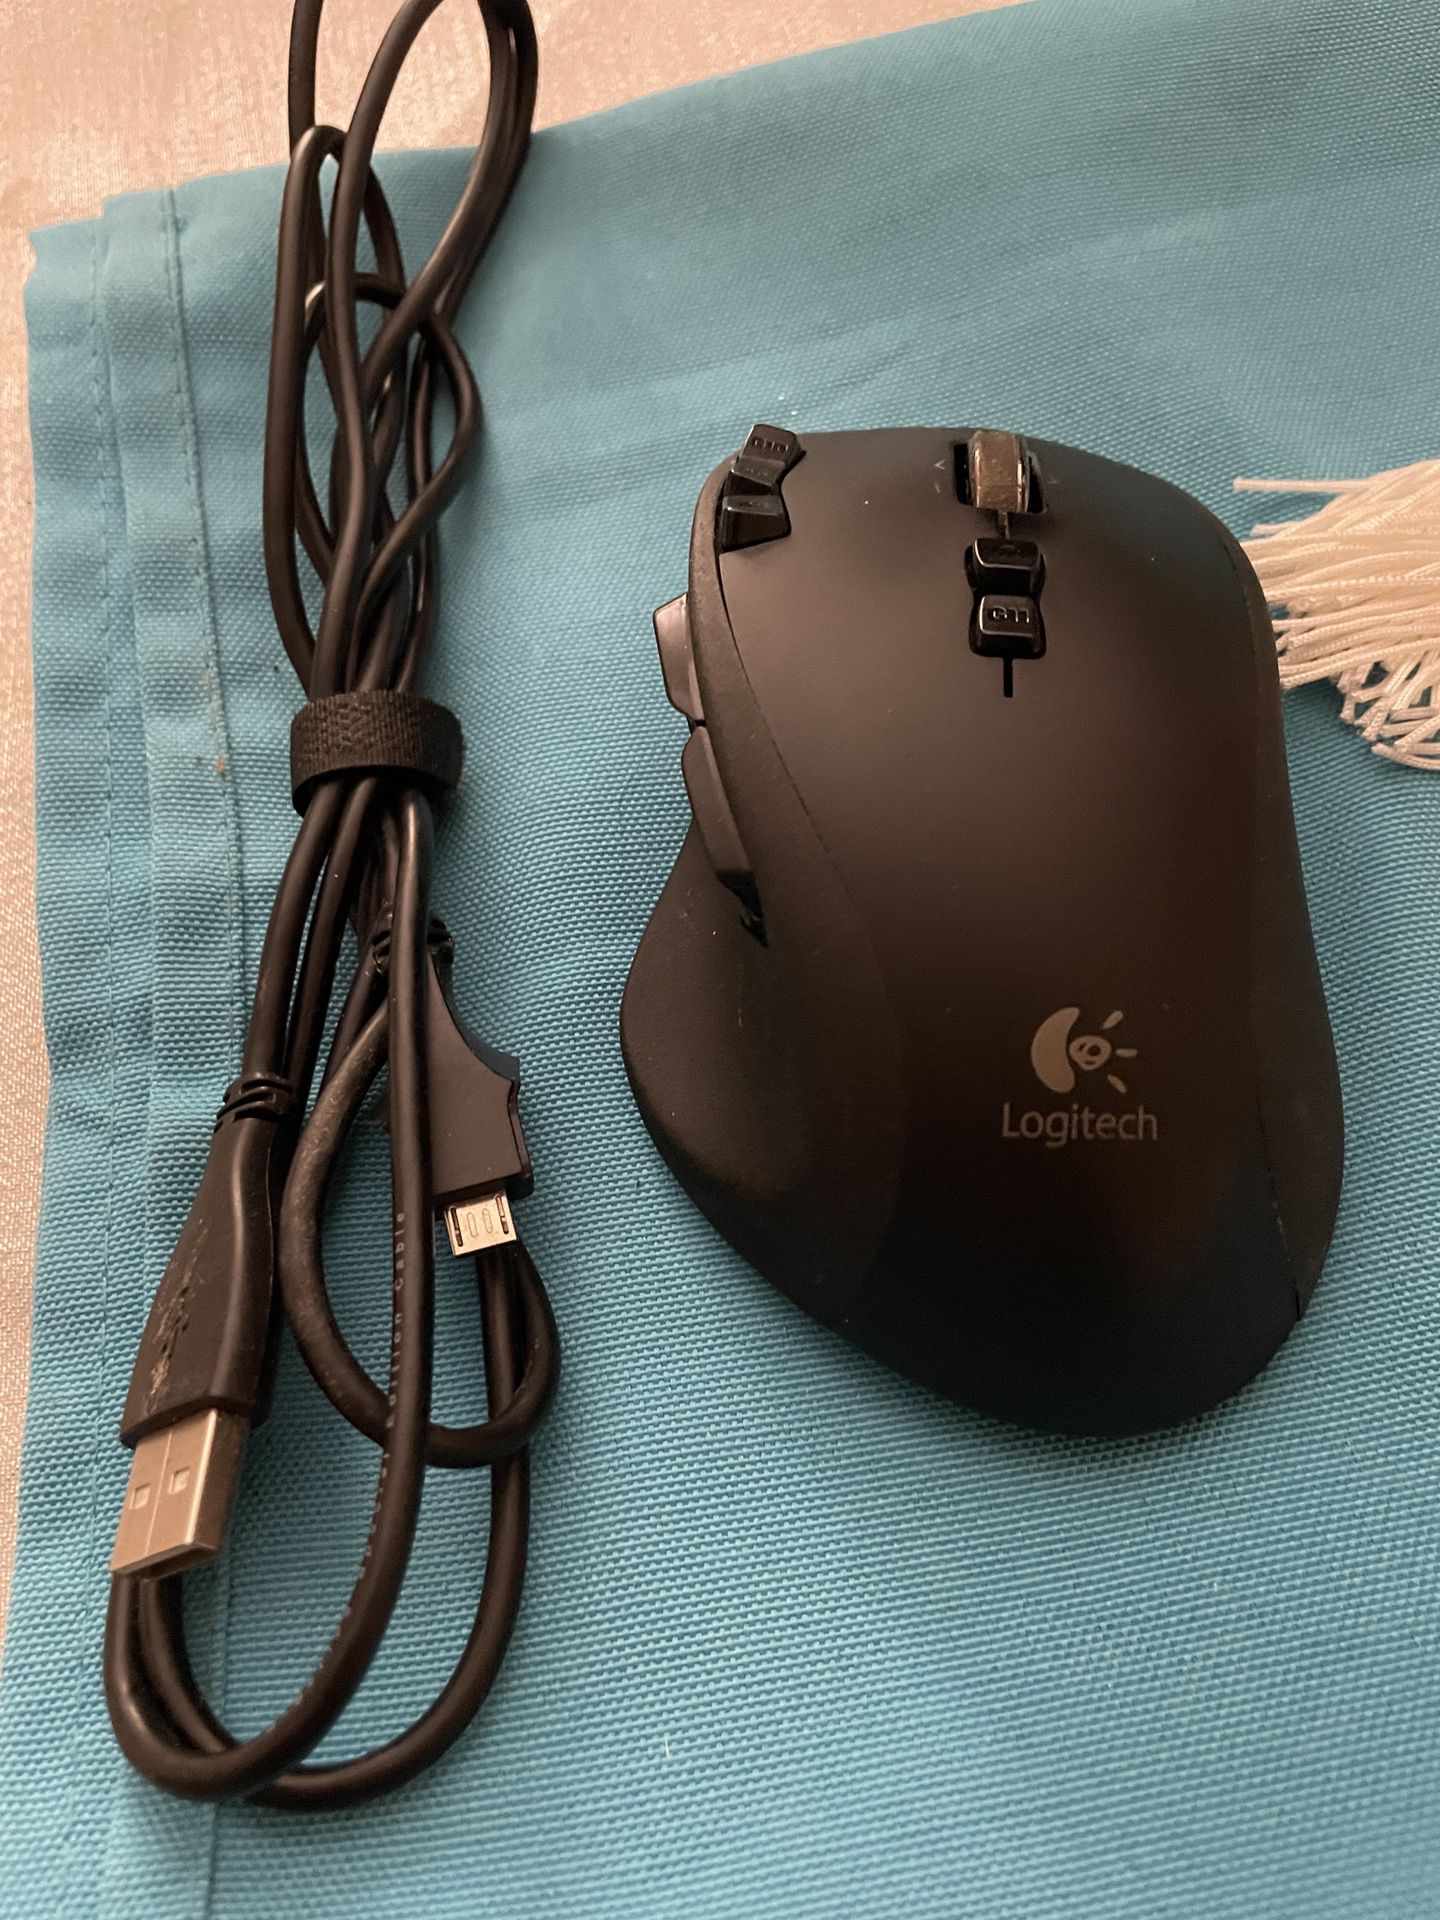 Litterær kunst Svømmepøl Profit Logitech G Series G700 Wireless Laser Gaming Mouse w/ USB Receiver and  Cable for Sale in Queens, NY - OfferUp